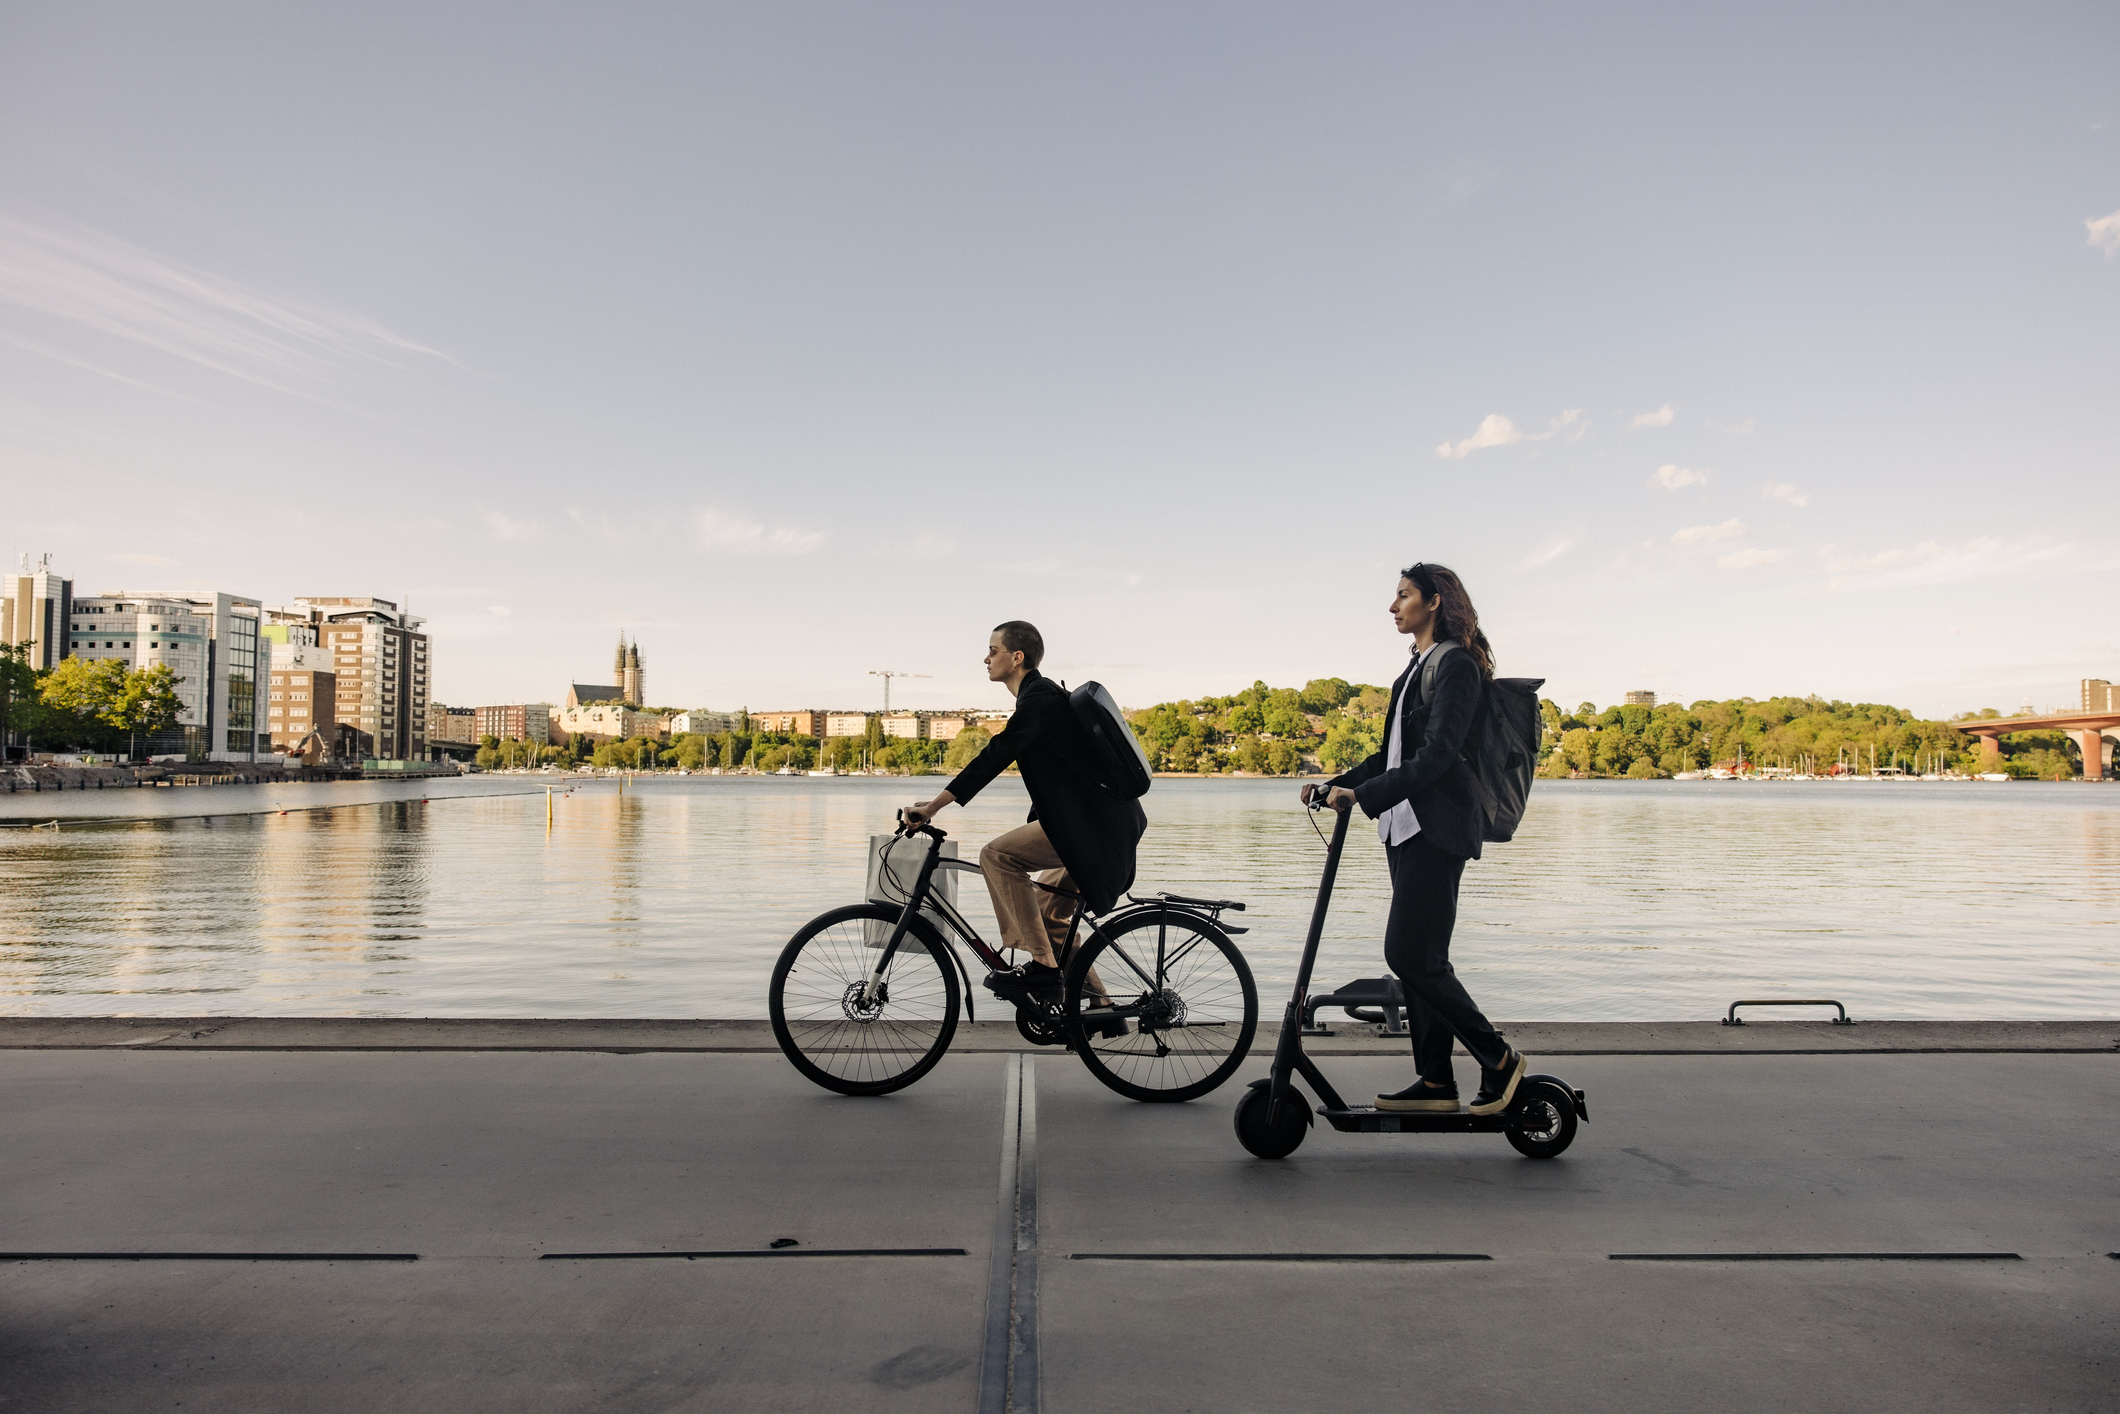 Person on a bicycle and another on an electric scooter by a riverside path